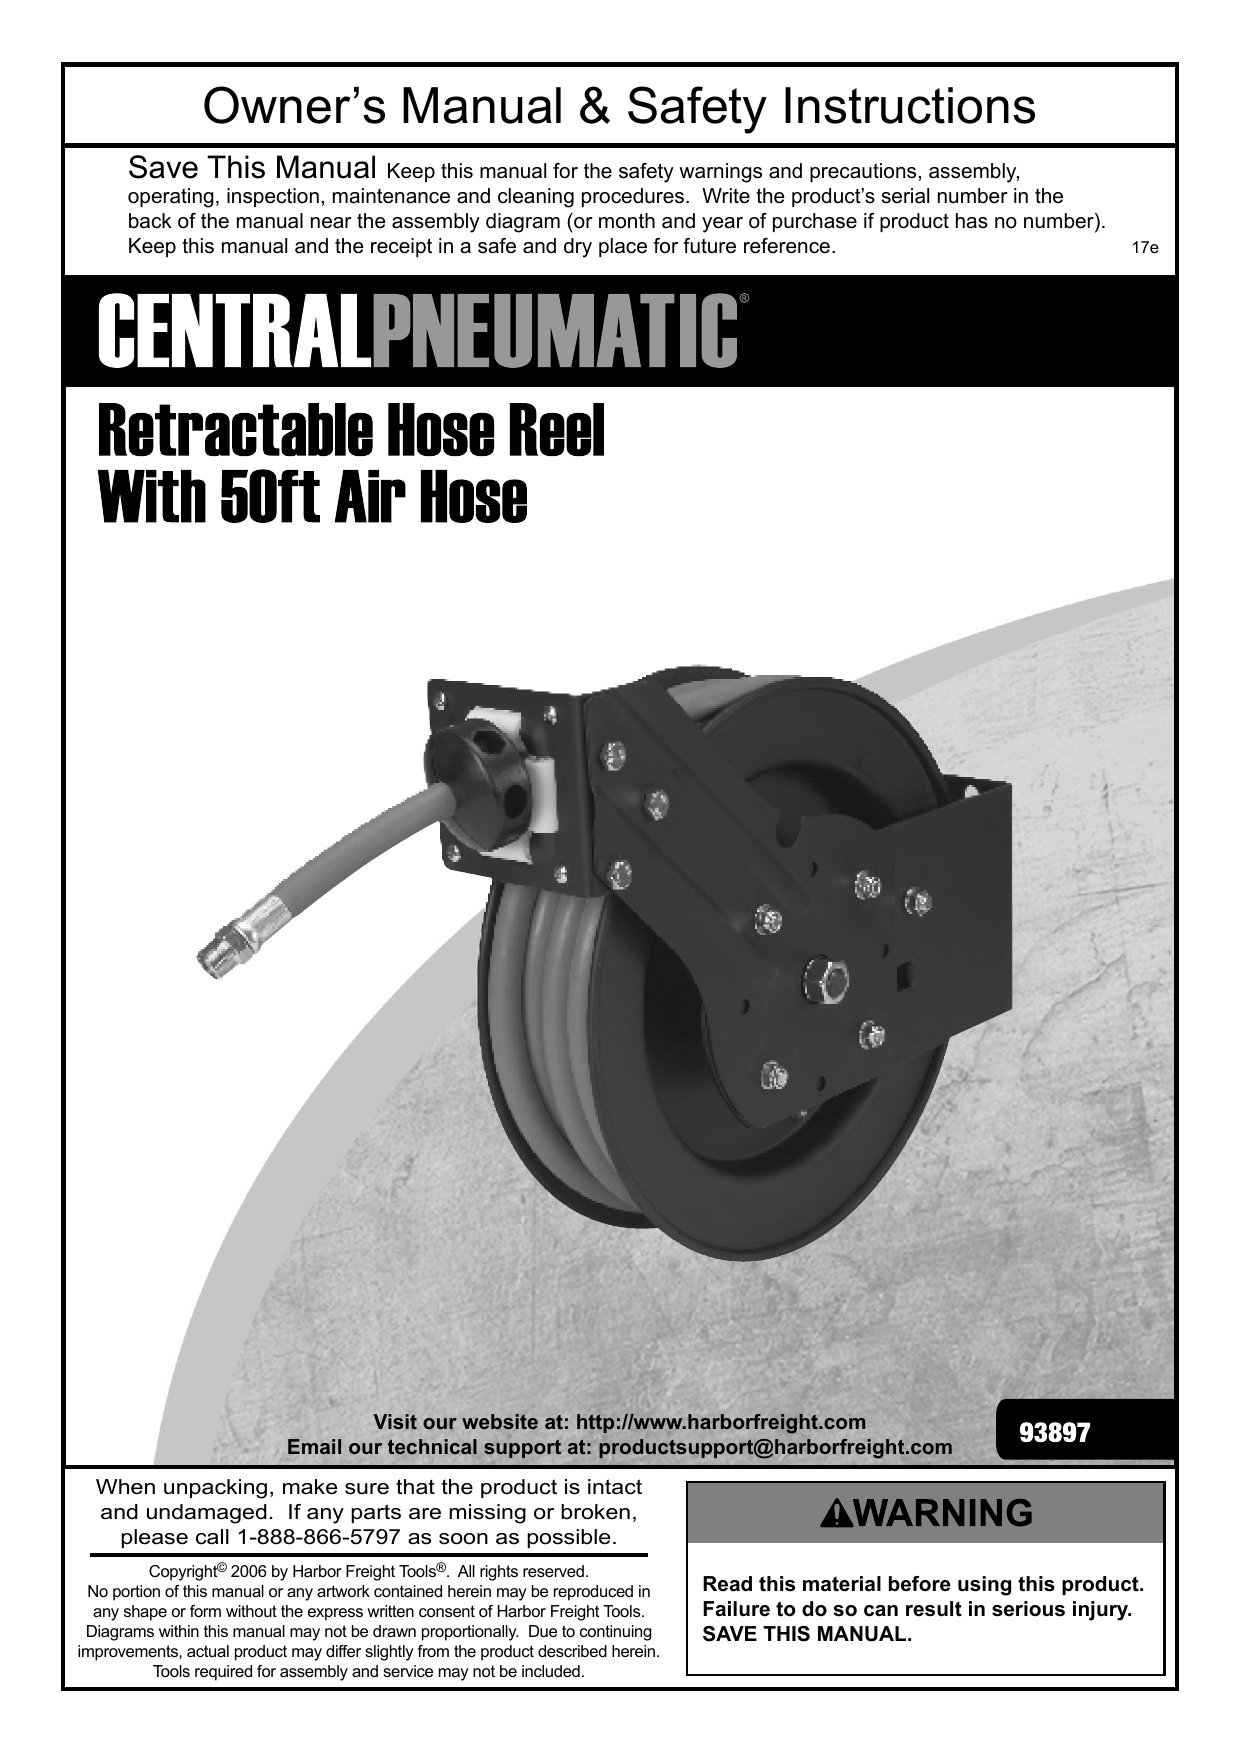 Central Pneumatic 93897 3/8 in. x 50 ft. Retractable Hose Reel Owner's  Manual